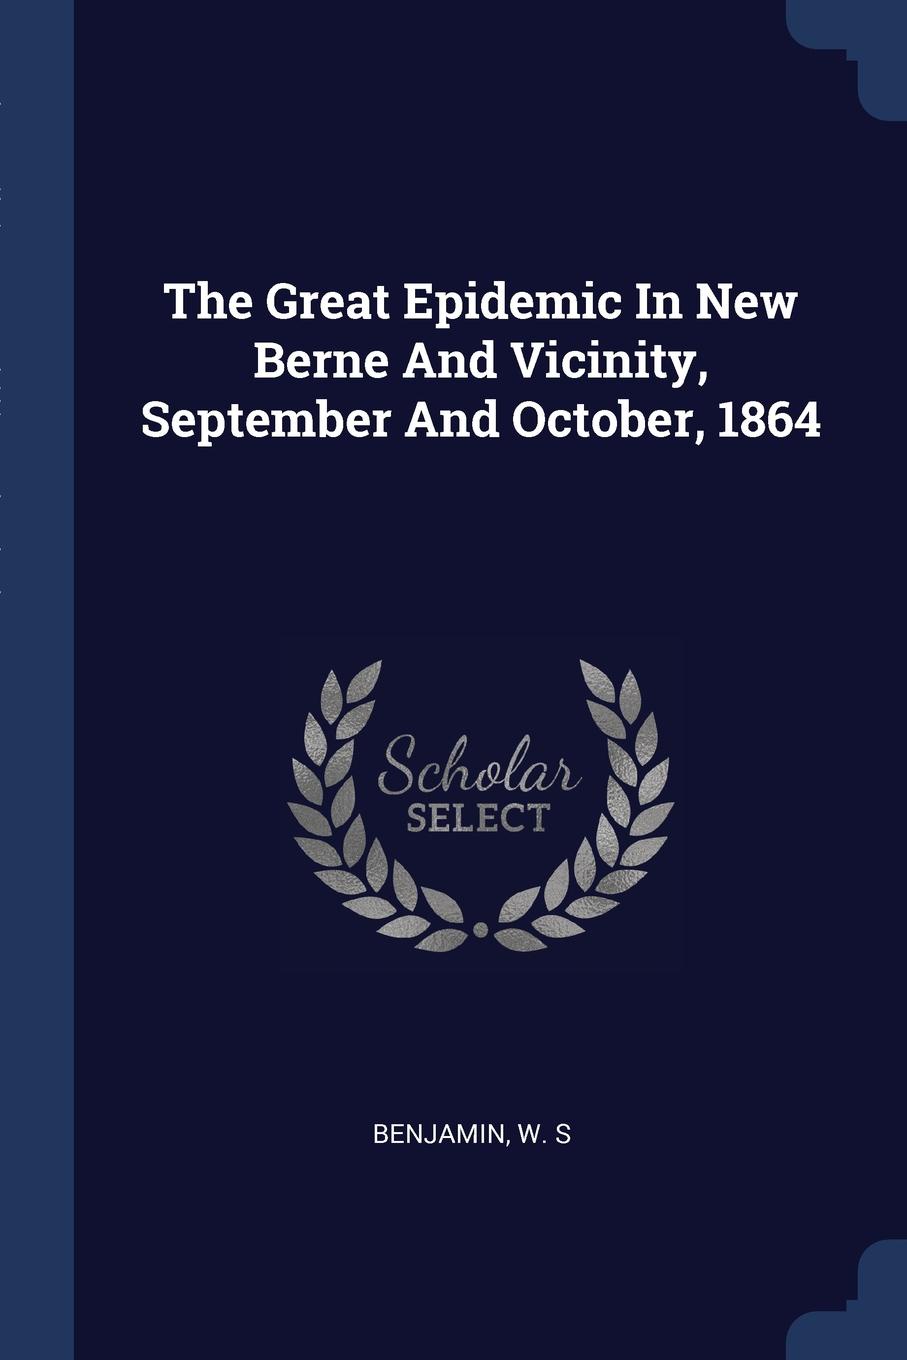 The Great Epidemic In New Berne And Vicinity, September And October, 1864